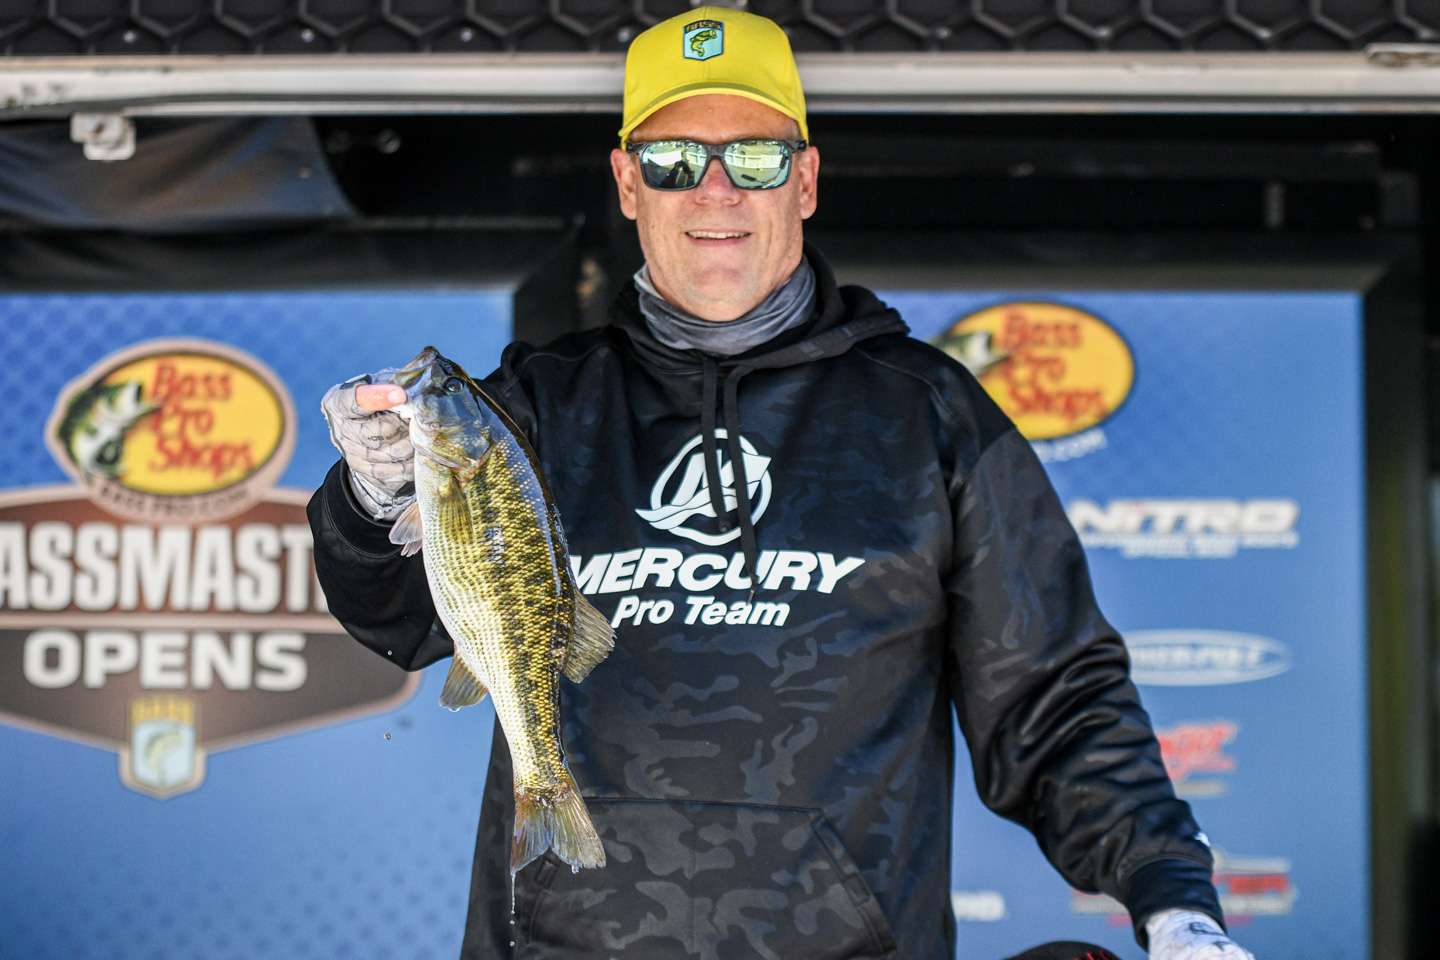 Ronald Young, co-angler (22nd, 4 - 9)